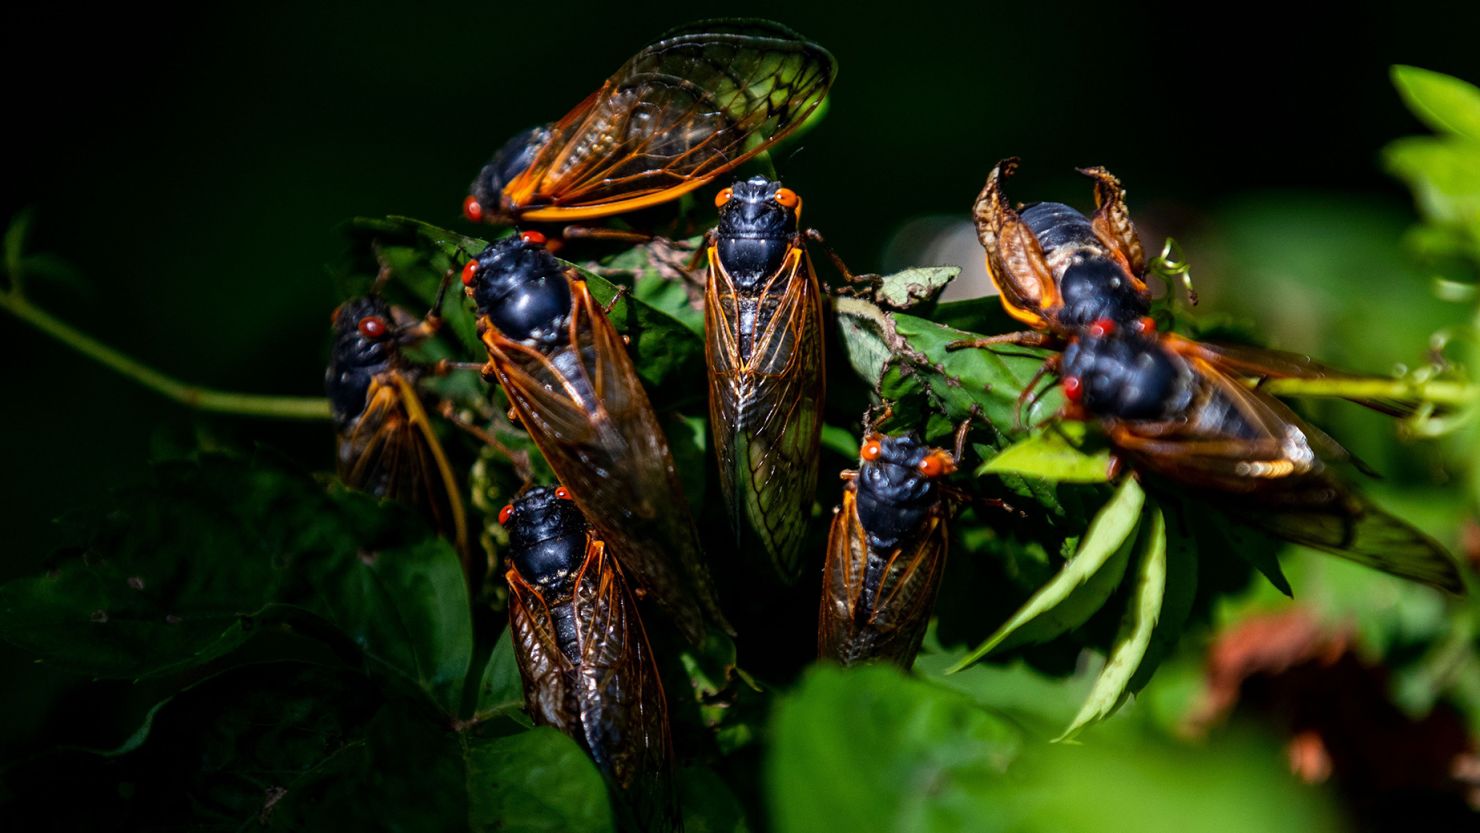 A group of adult periodical cicadas, part of Brood X that emerged in 2021, perch on vegetation after shedding their exoskeletons in Alexandria, Virginia, in June 2021.